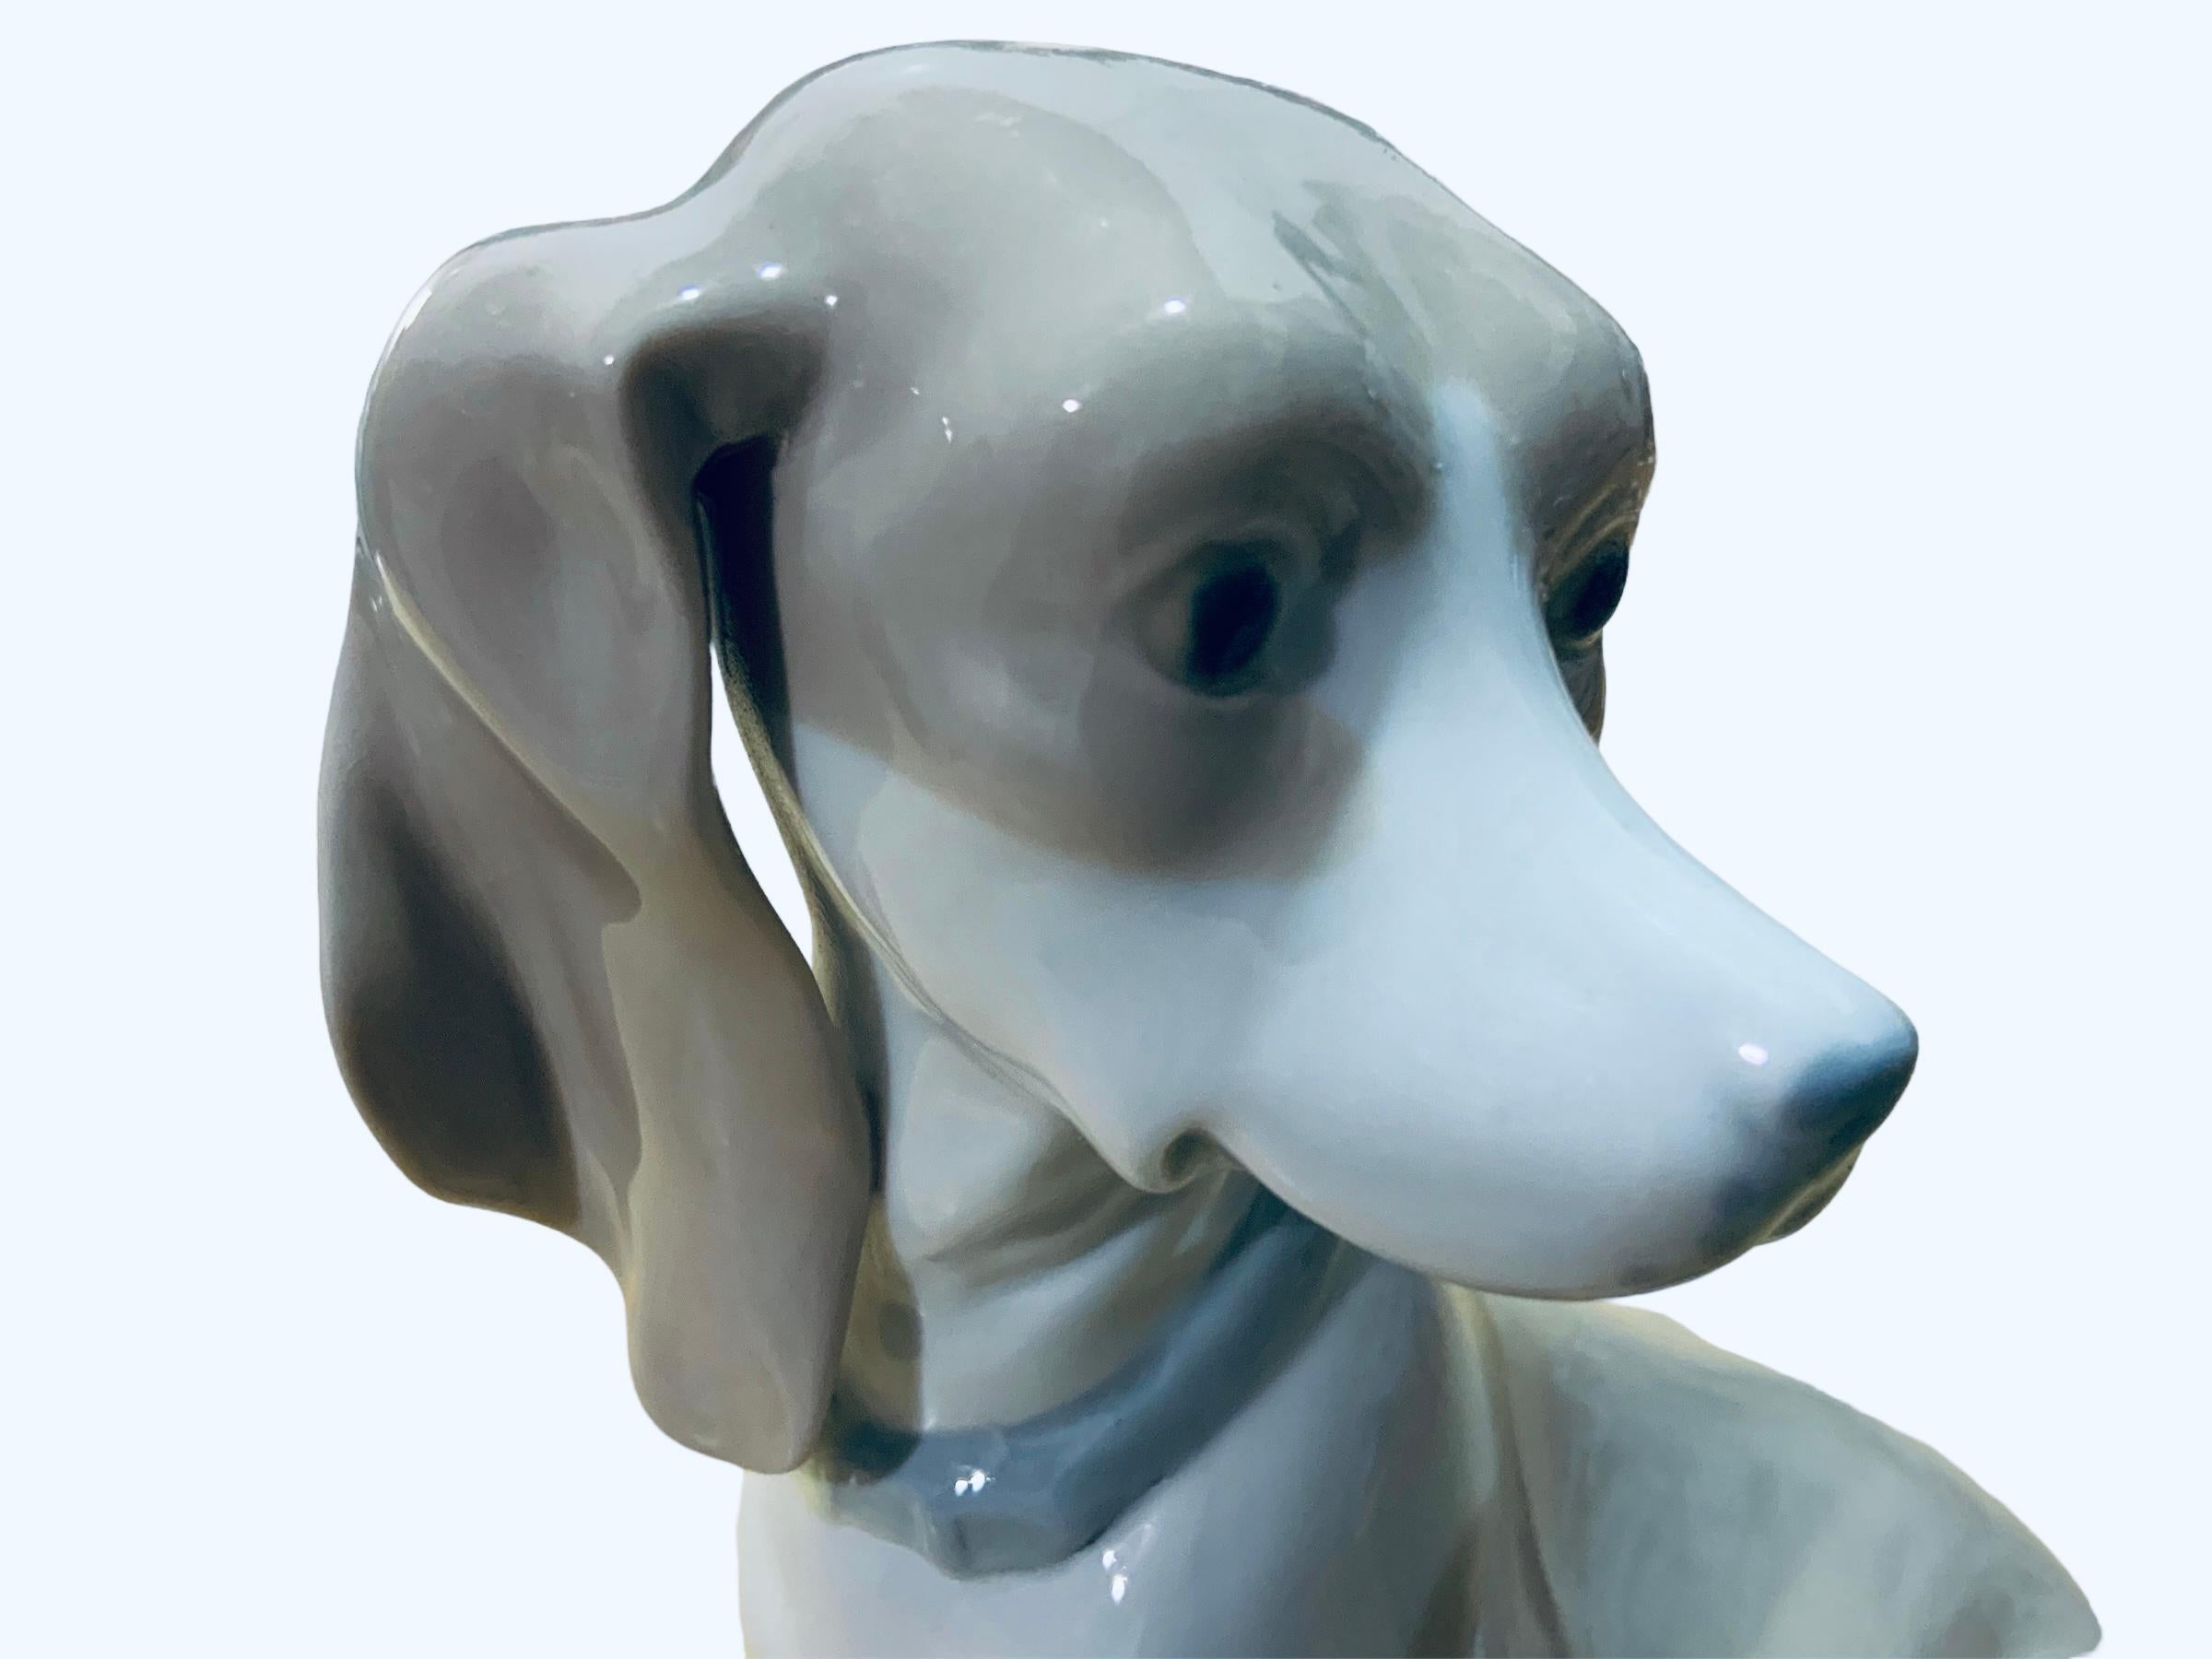 This is a Rex Valencia porcelain figurine of a dog. It depicts a hand painted adorable Hummelwerk dog standing up with a blue belt in his neck and full of white and brown hair. The Rex Valencia hallmark is below the figurine.